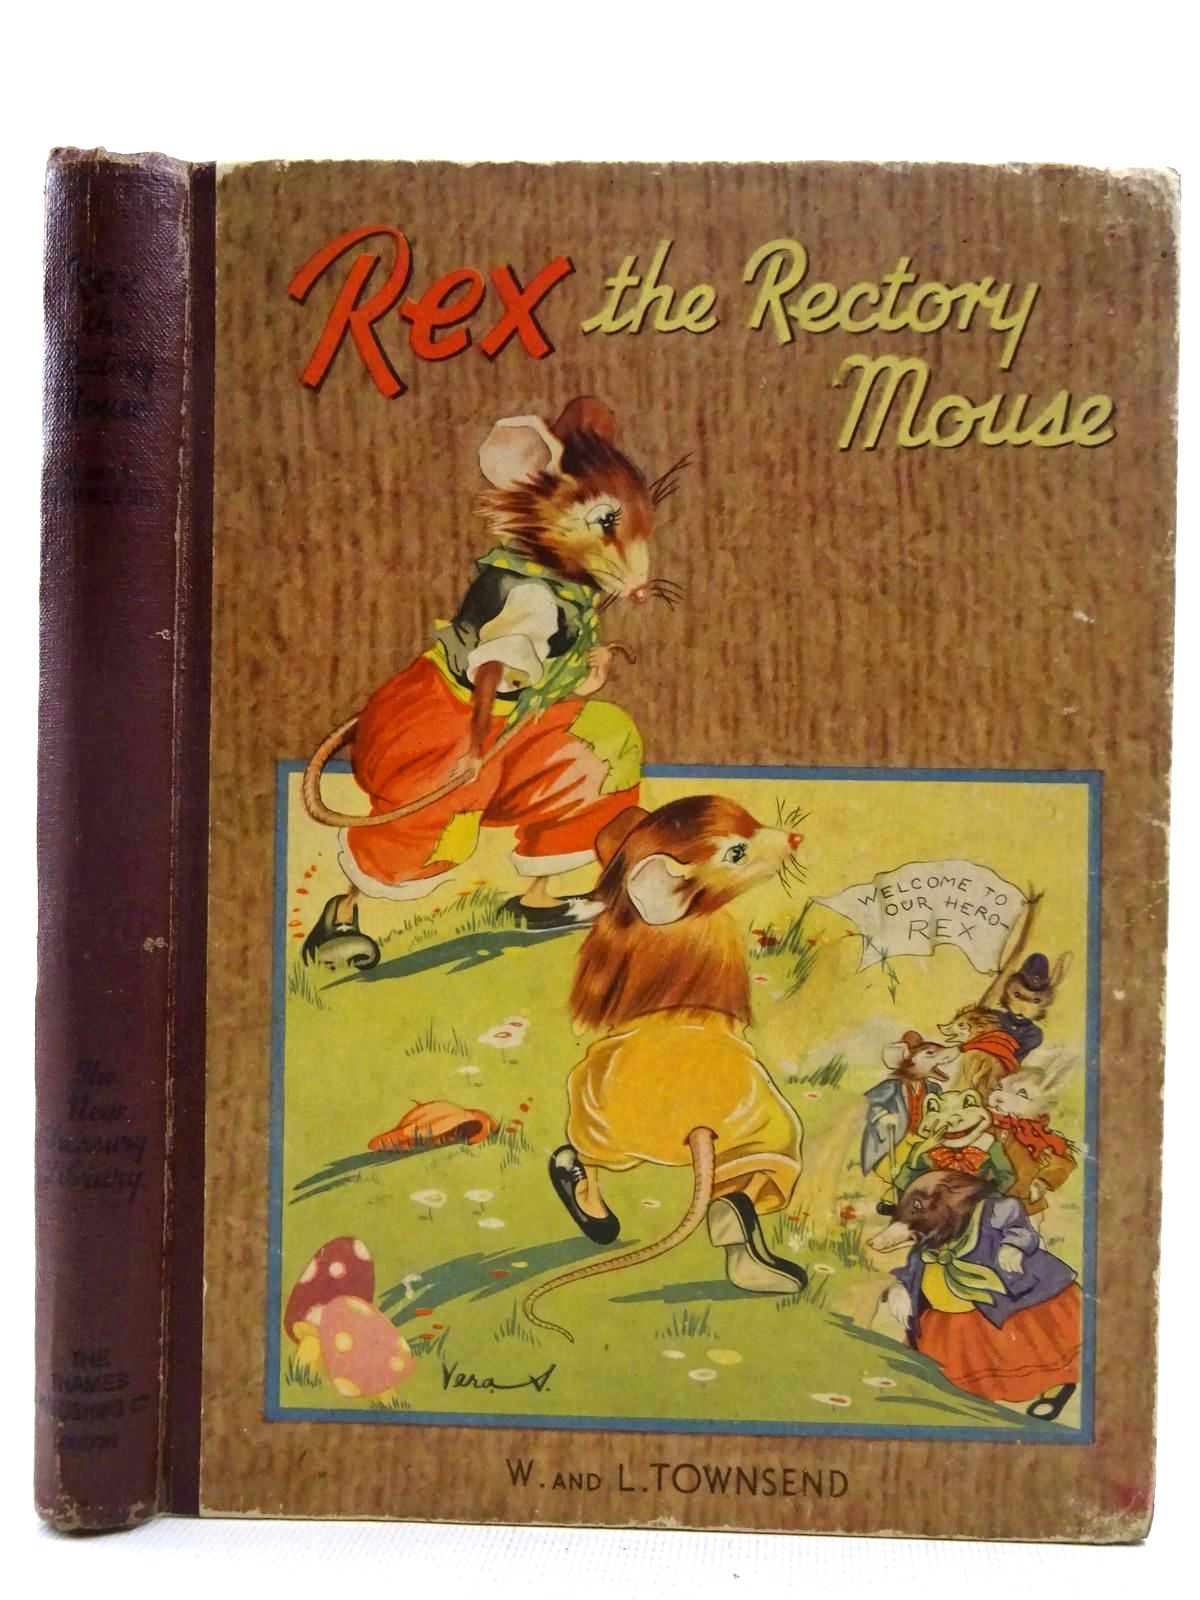 TOWNSEND, W. & TOWNSEND, L. ILLUSTRATED BY RICE-JAY, VERA - Rex the Rectory Mouse